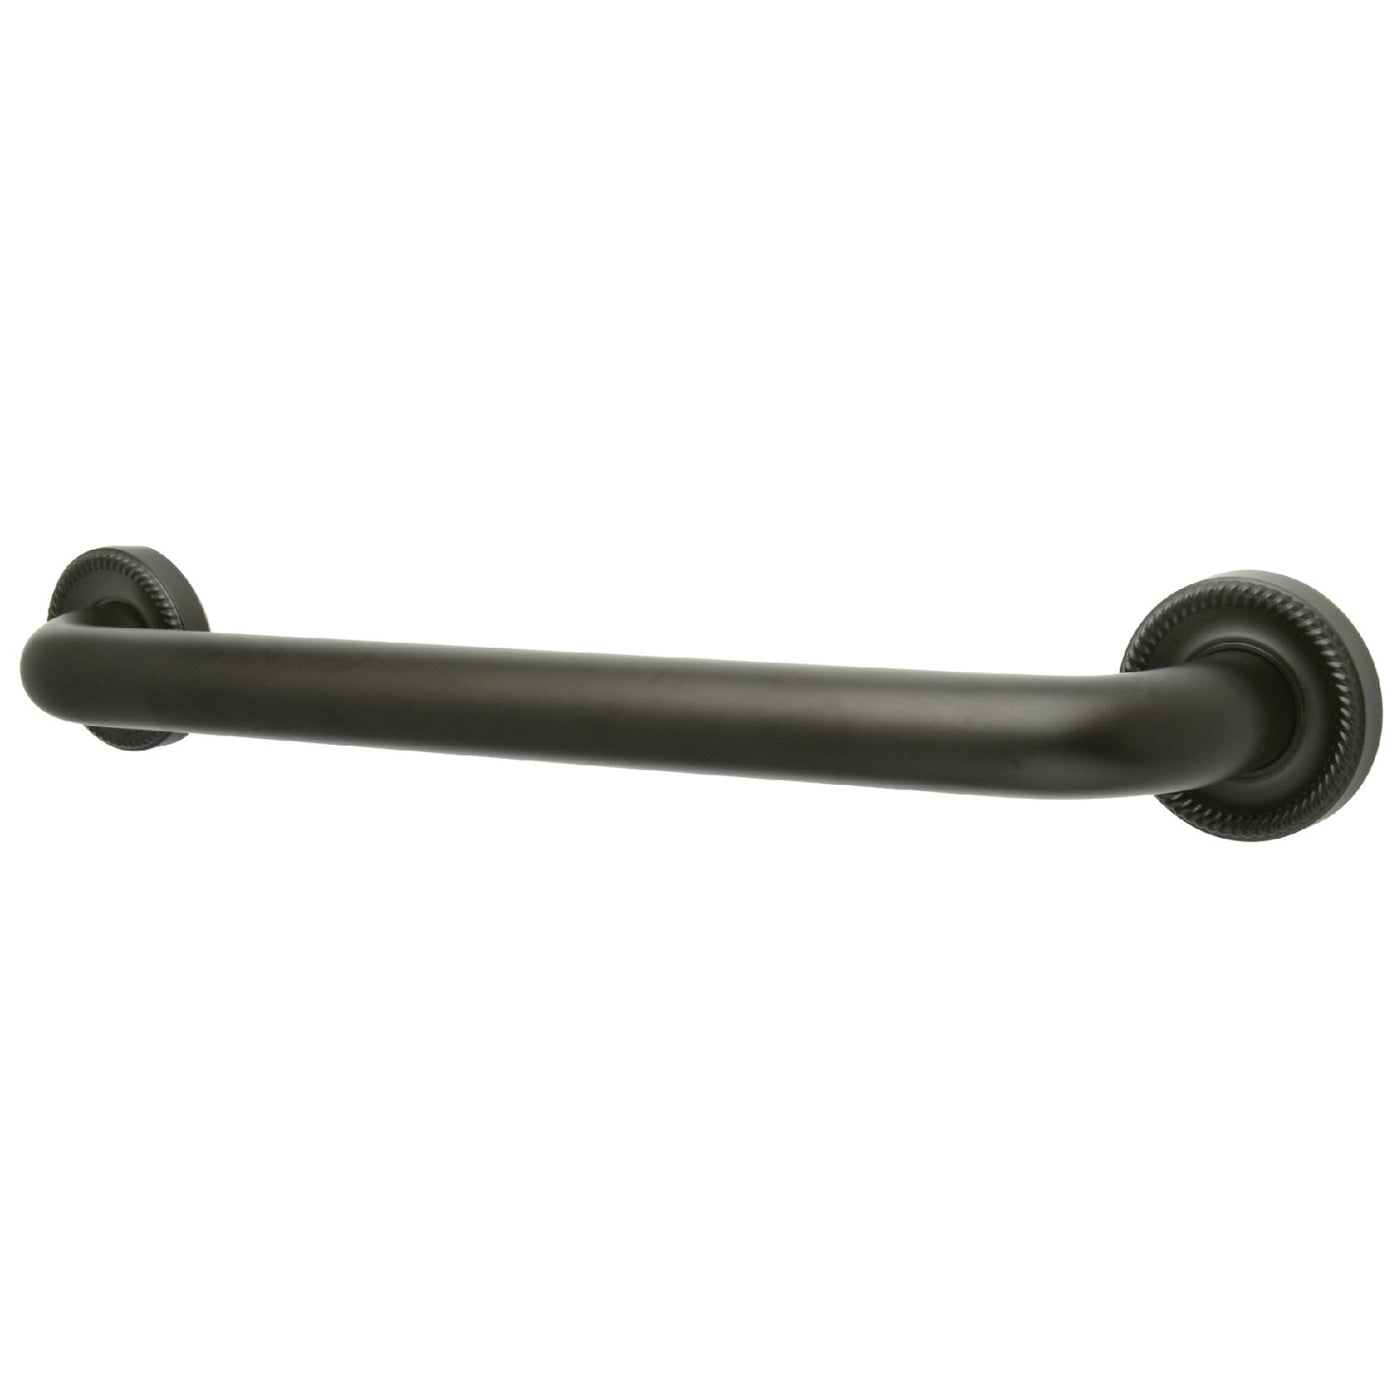 Elements of Design EDR914365 36-Inch X 1-1/4-Inch OD Grab Bar, Oil Rubbed Bronze